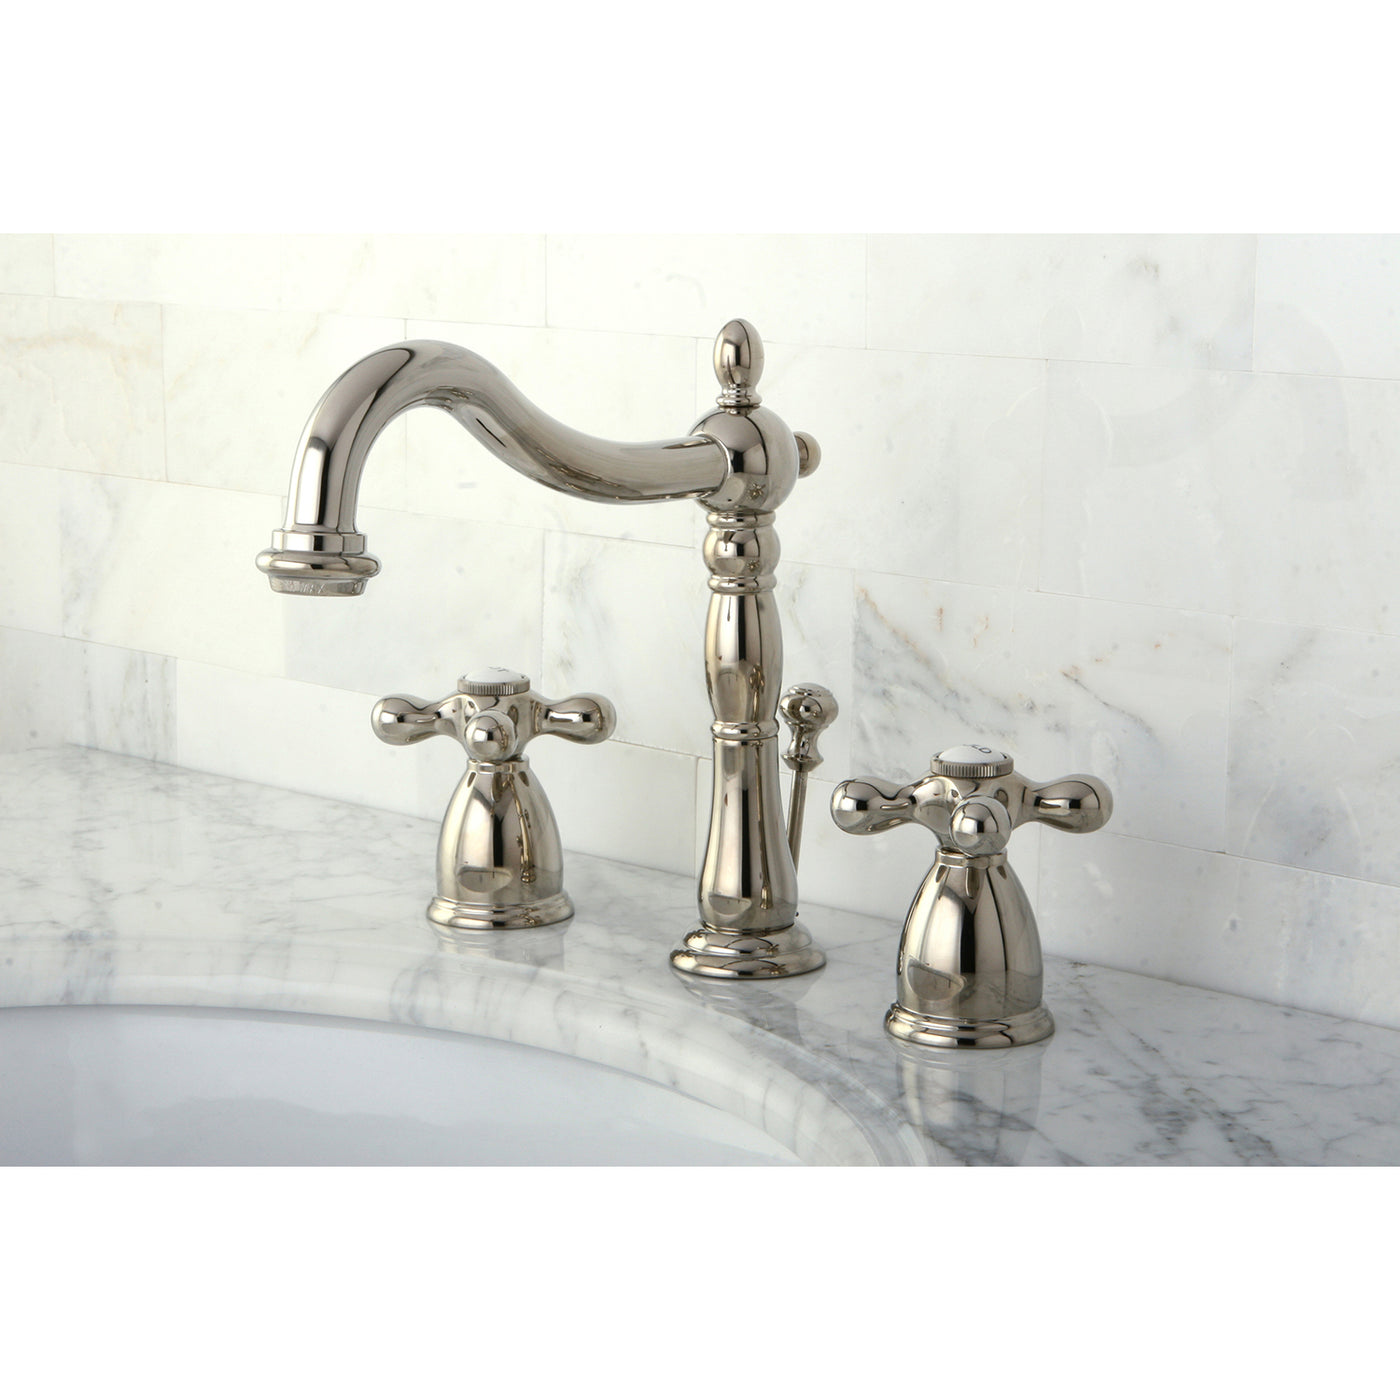 Elements of Design EB1976AX Widespread Bathroom Faucet with Brass Pop-Up, Polished Nickel